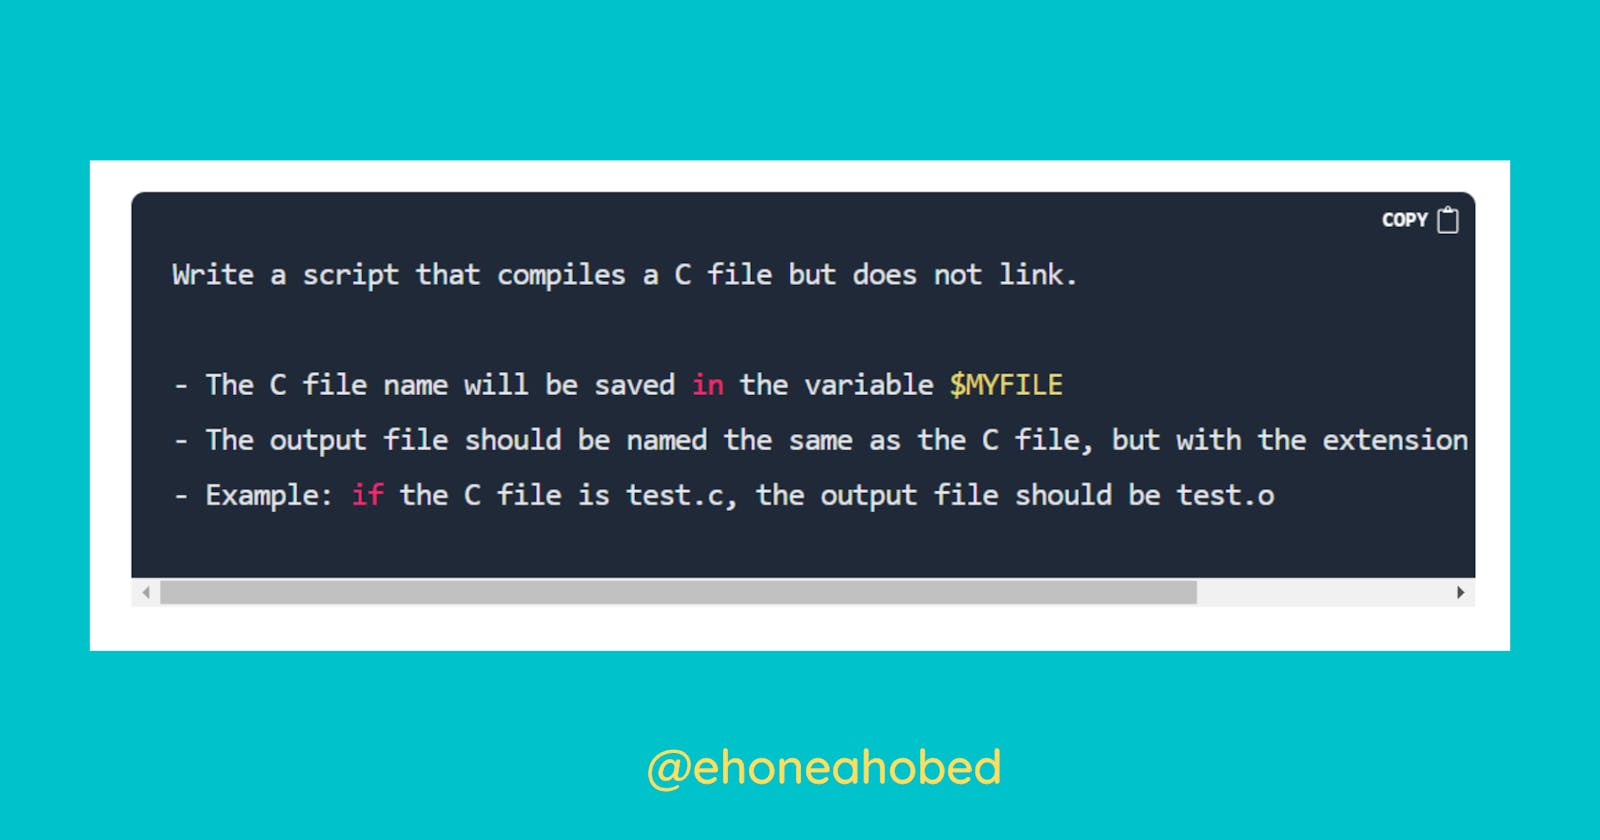 Write a script that compiles a C file but does not link